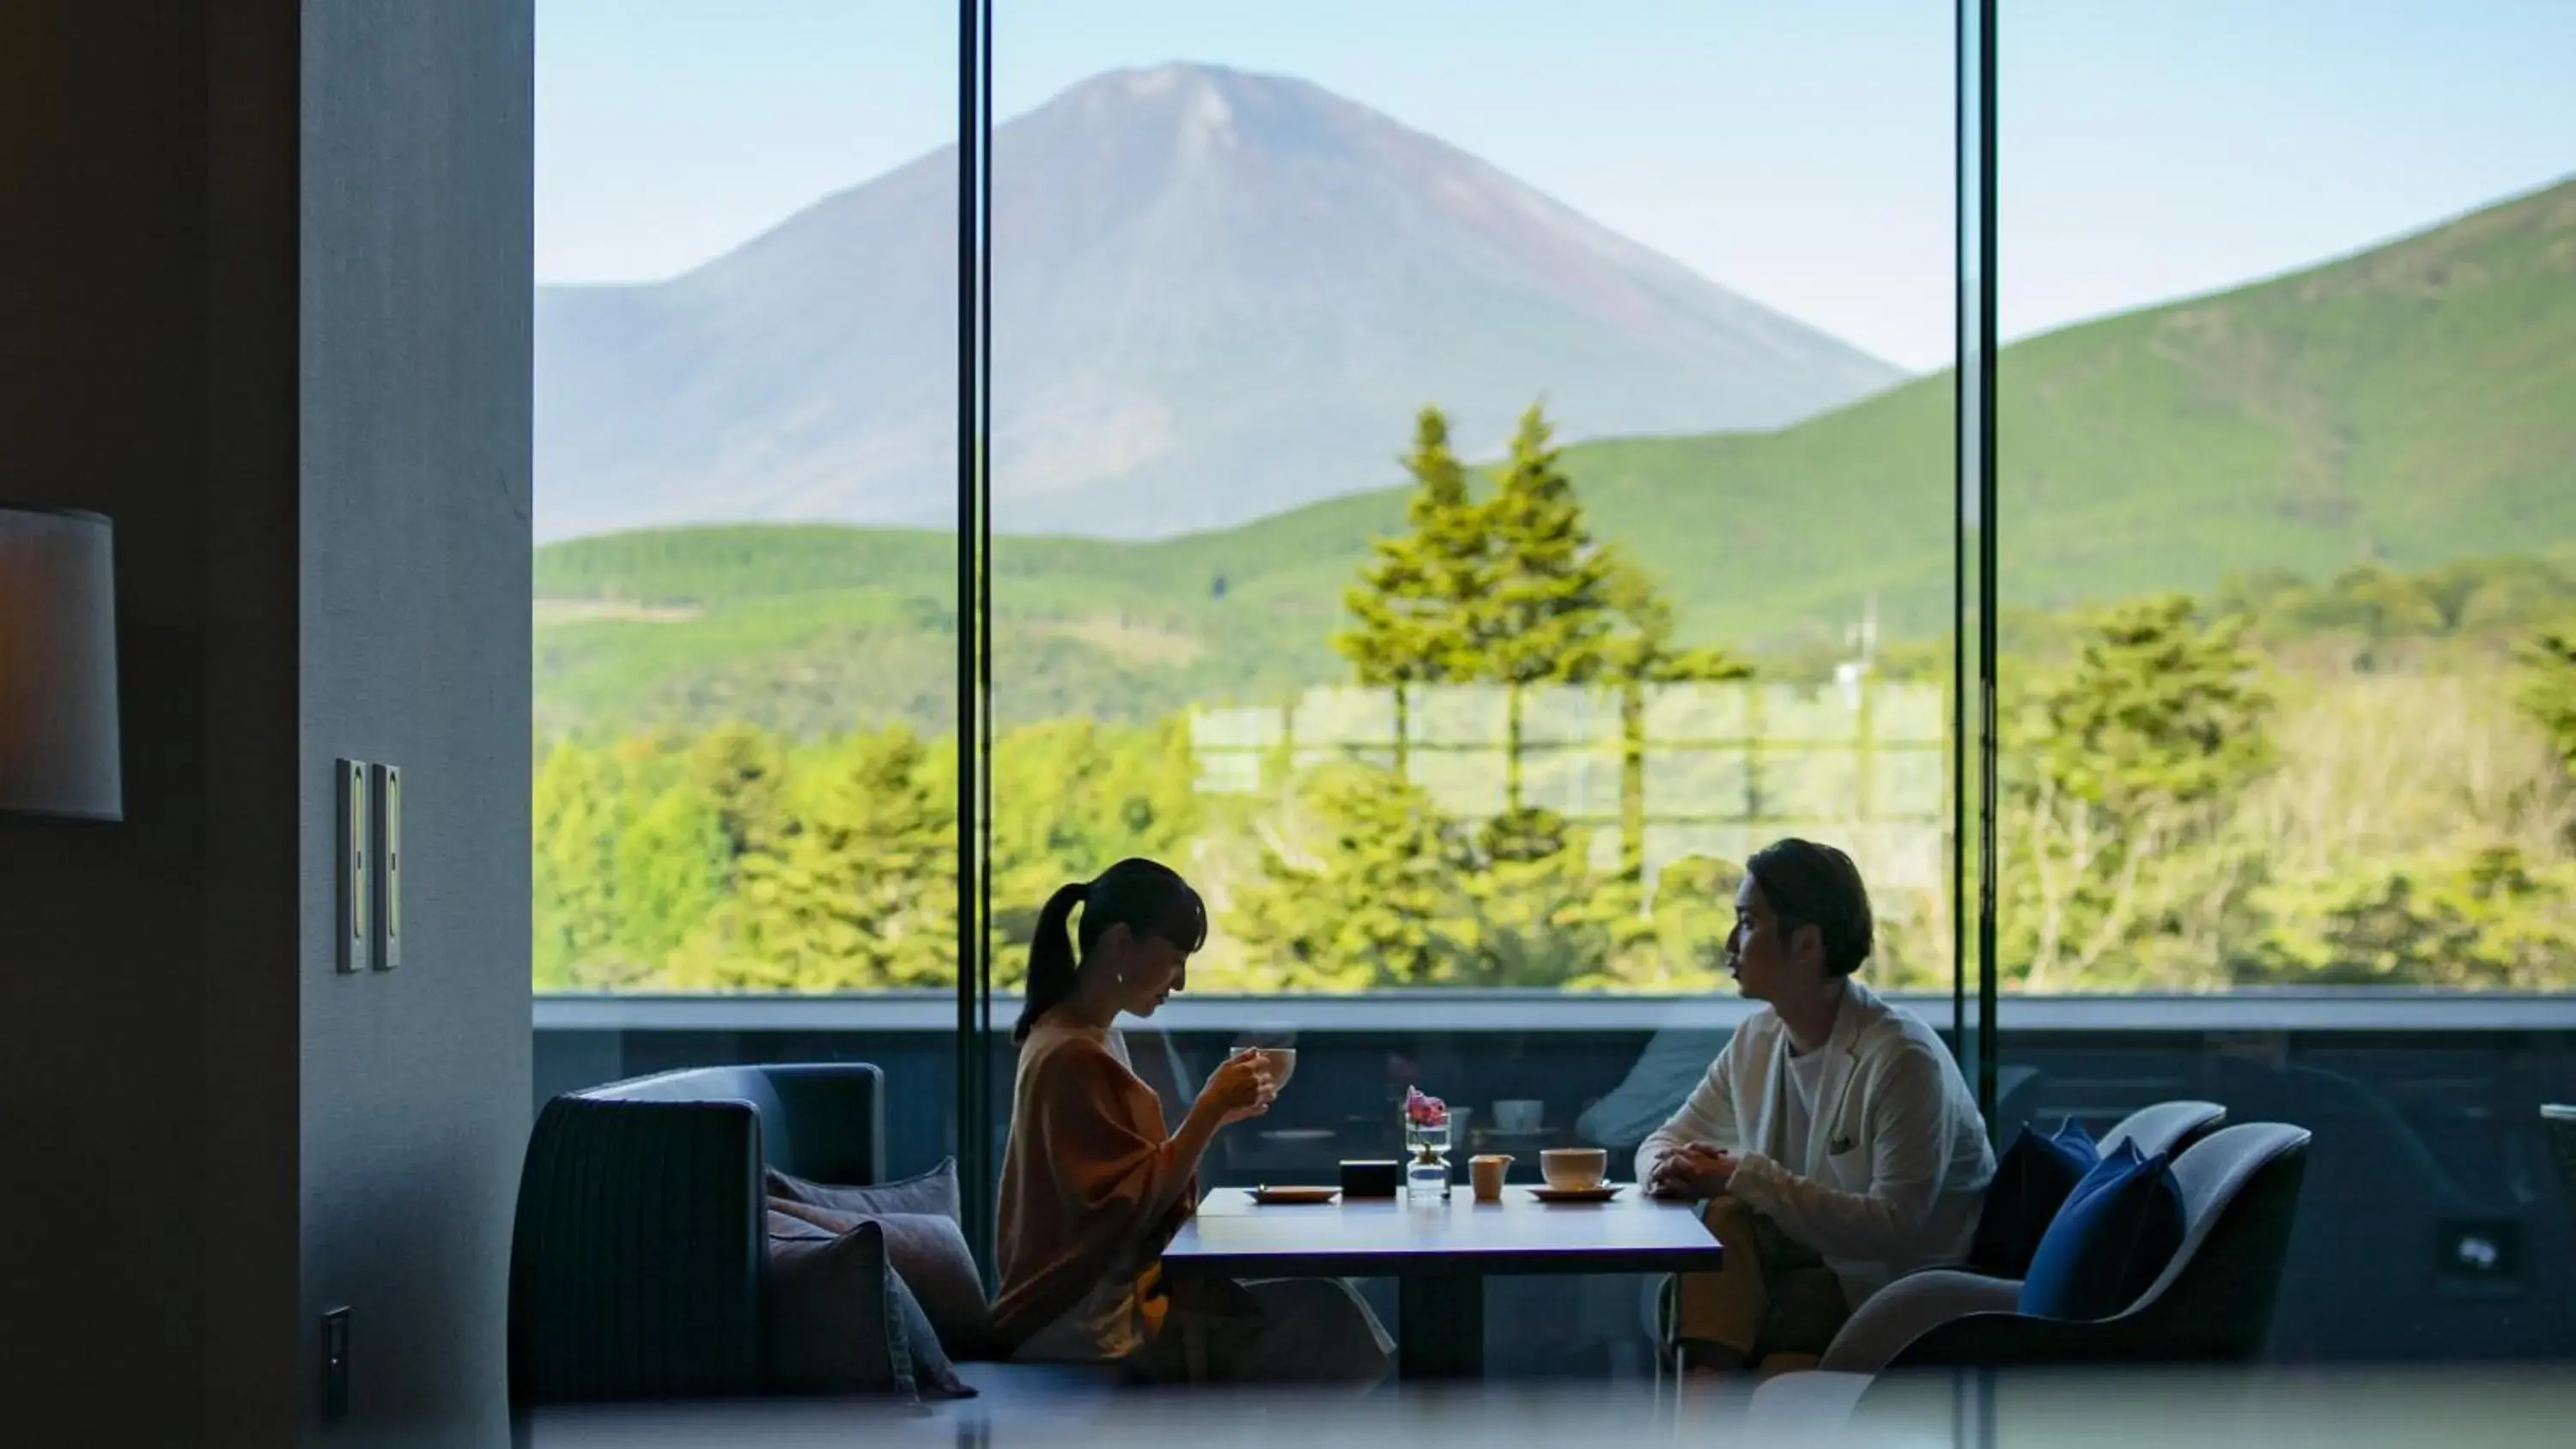 Restaurant/places to eat in Fuji Speedway Hotel, Unbound Collection by Hyatt